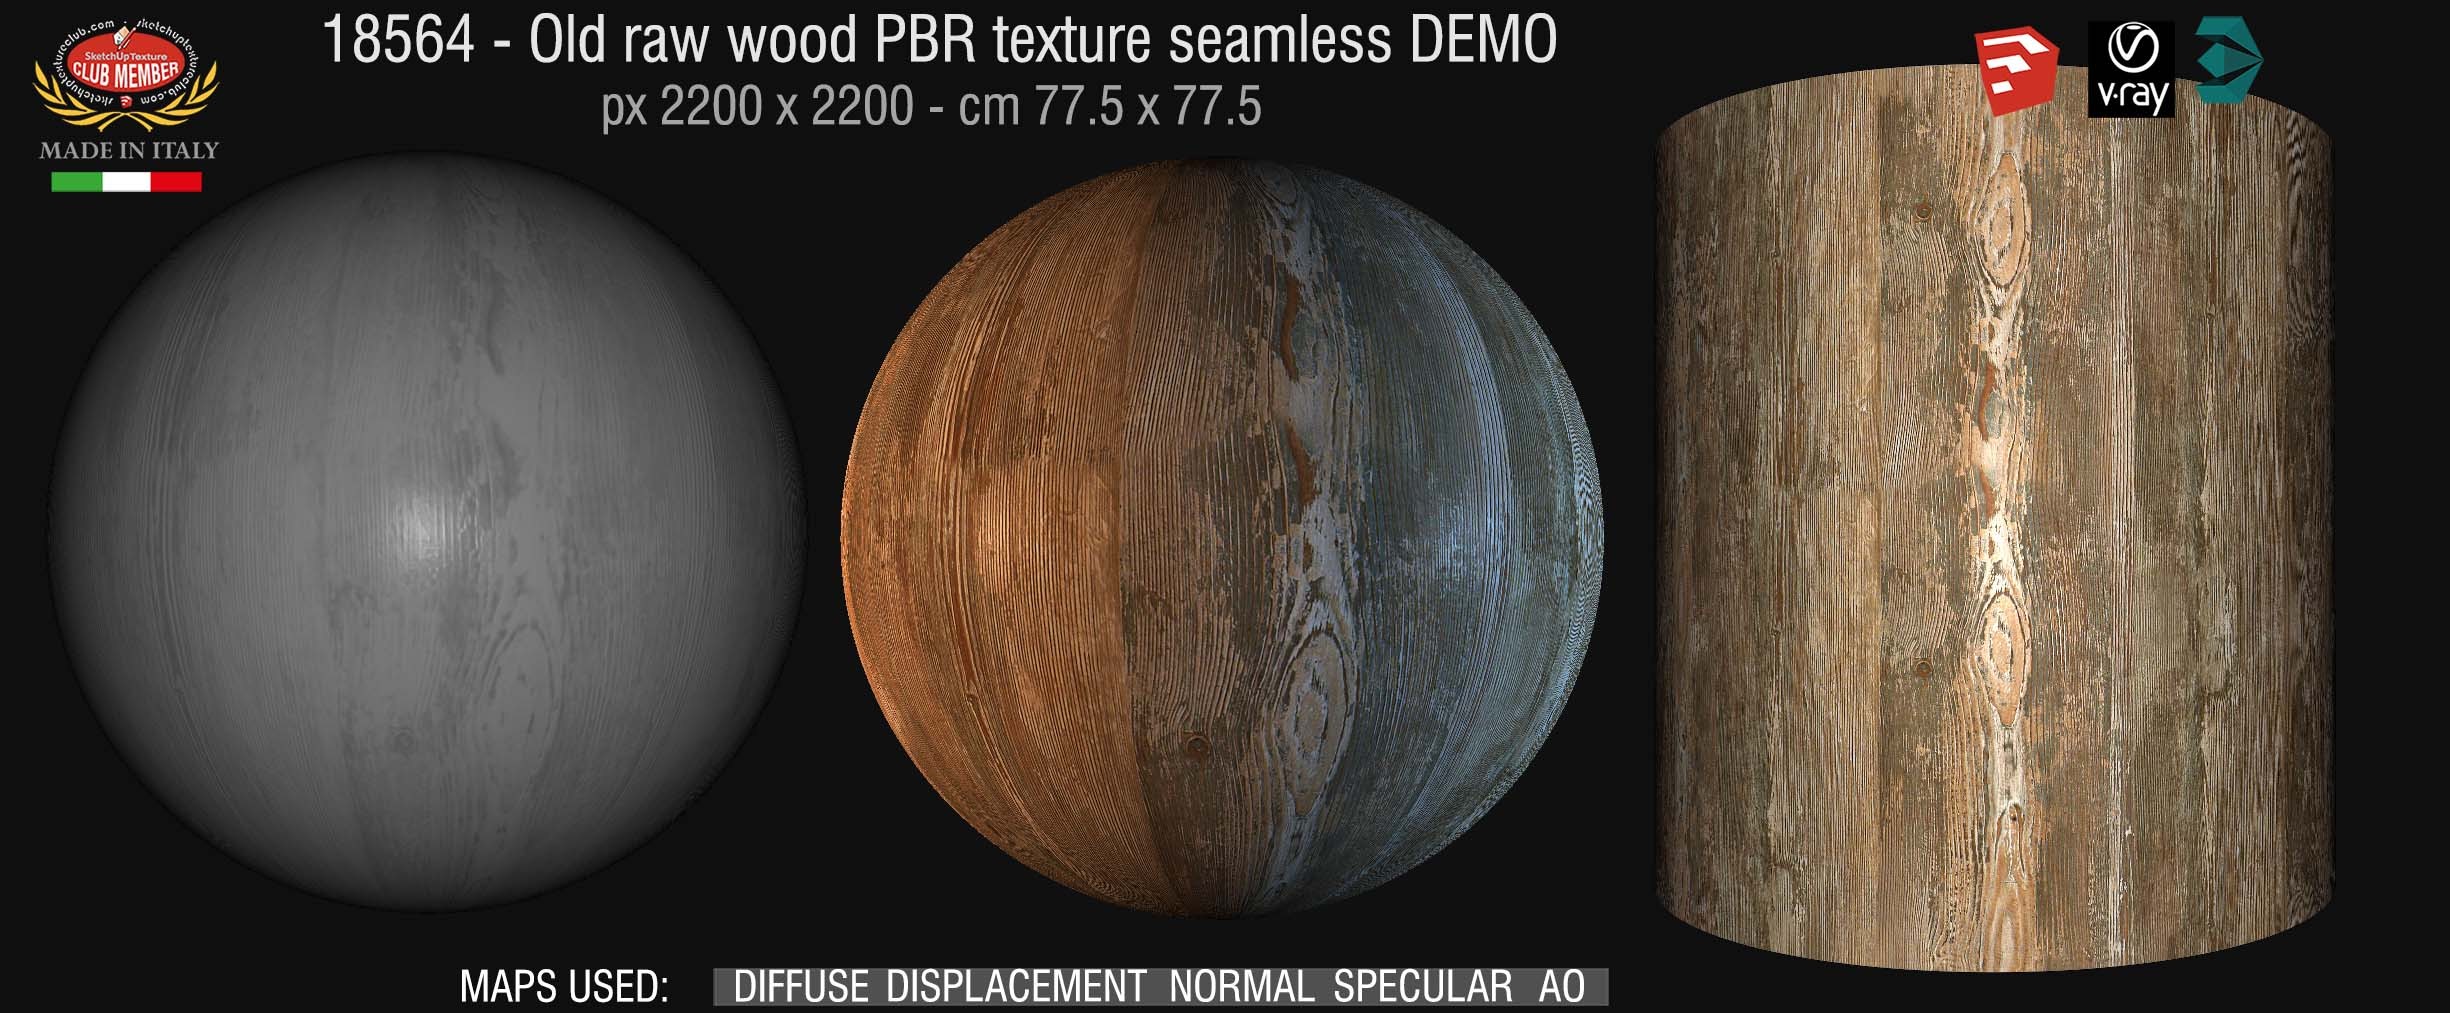 19564 Old raw wood PBR texture seamless DEMO